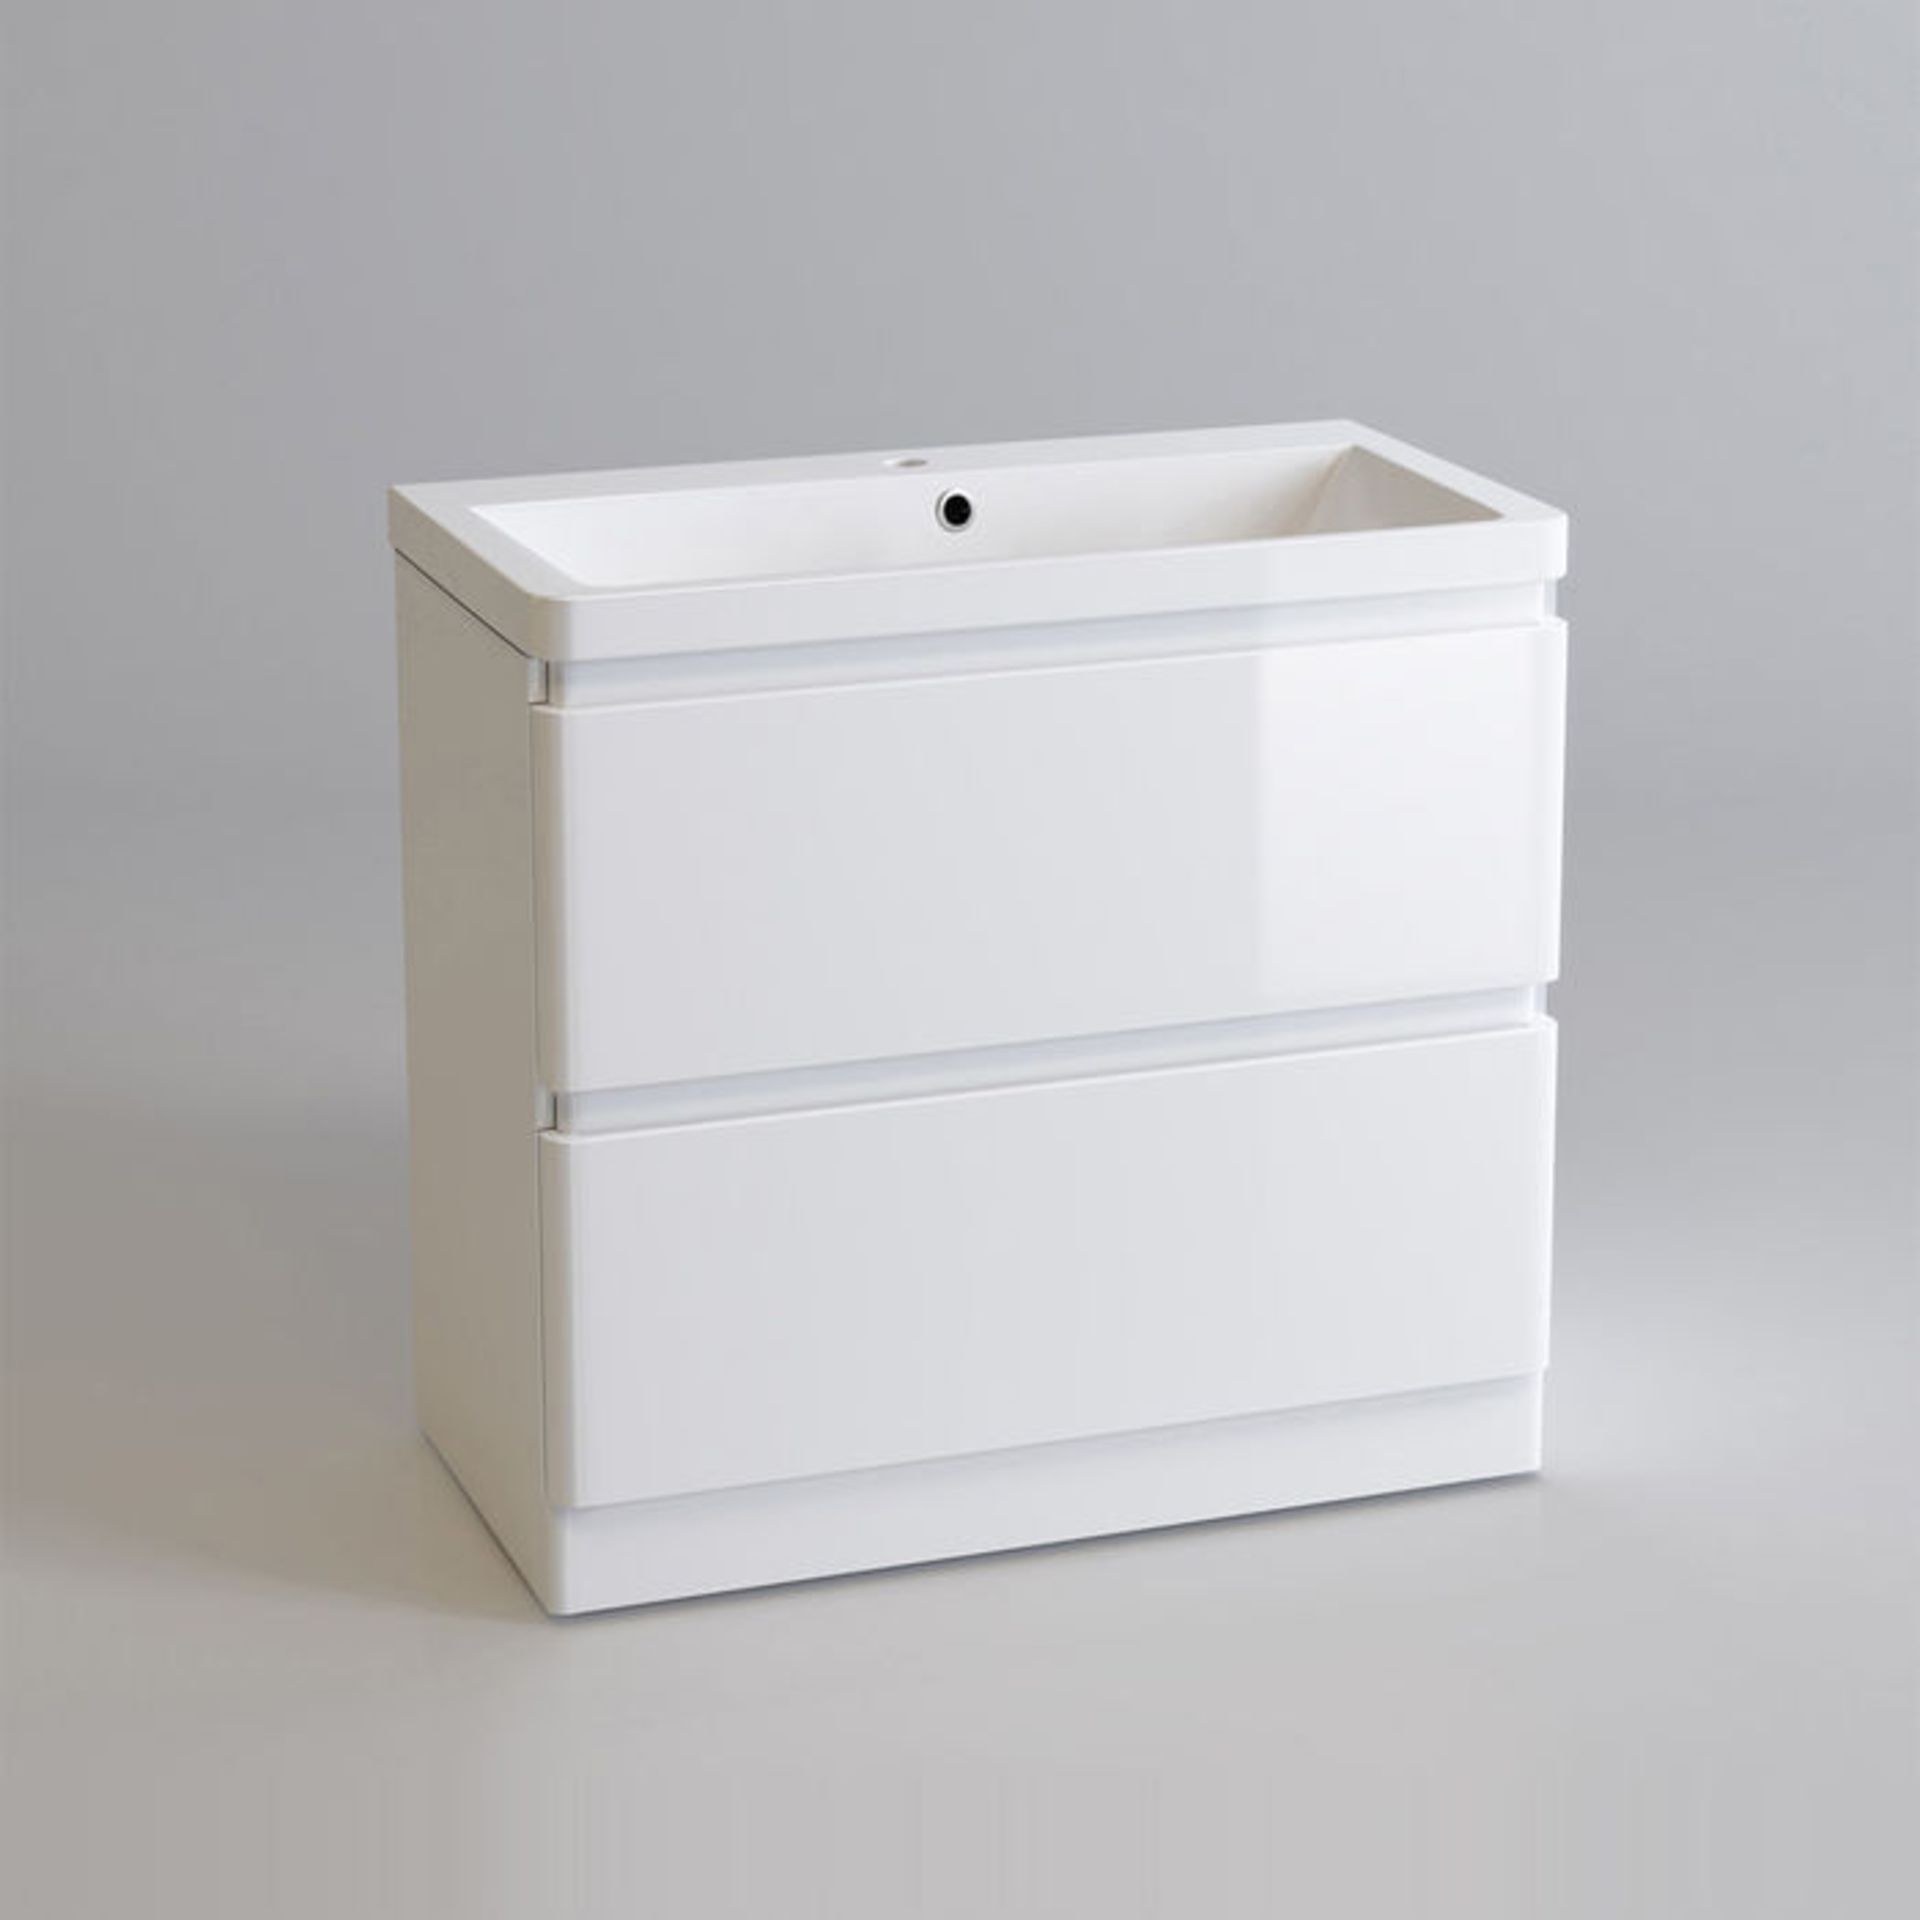 (A23) 800mm Denver Gloss White Built In Sink Drawer Unit - Floor Standing. RRP £549.99. Comes ... - Image 3 of 4